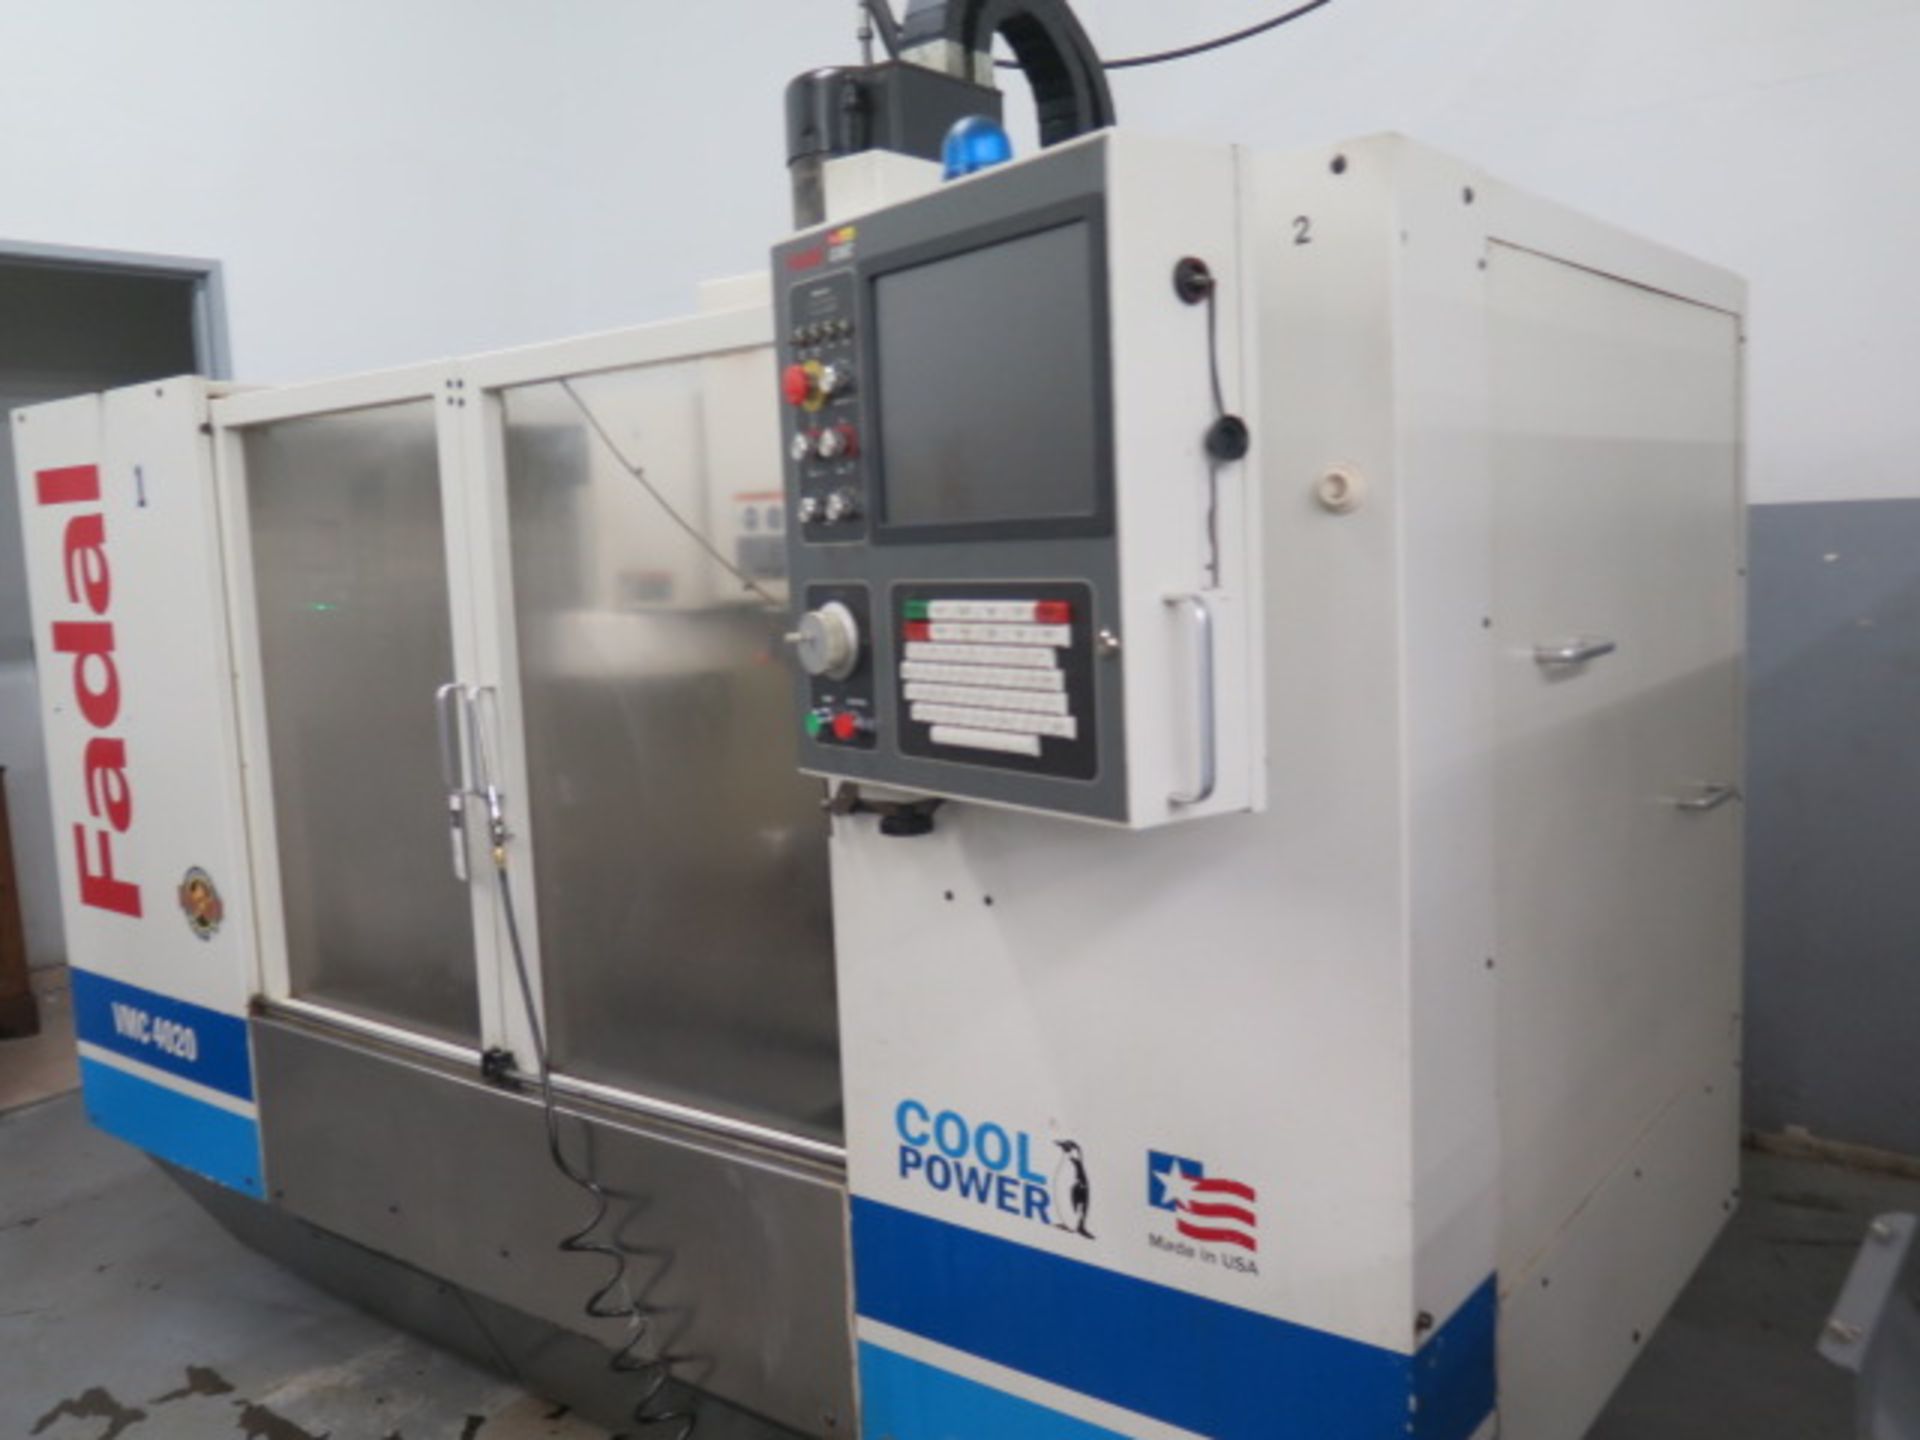 2004 Fadal VMC4020HT 4-Axis CNC Vertical Machining Center s/n 032004056312 w/ Fadal Multiprocessor - Image 2 of 13